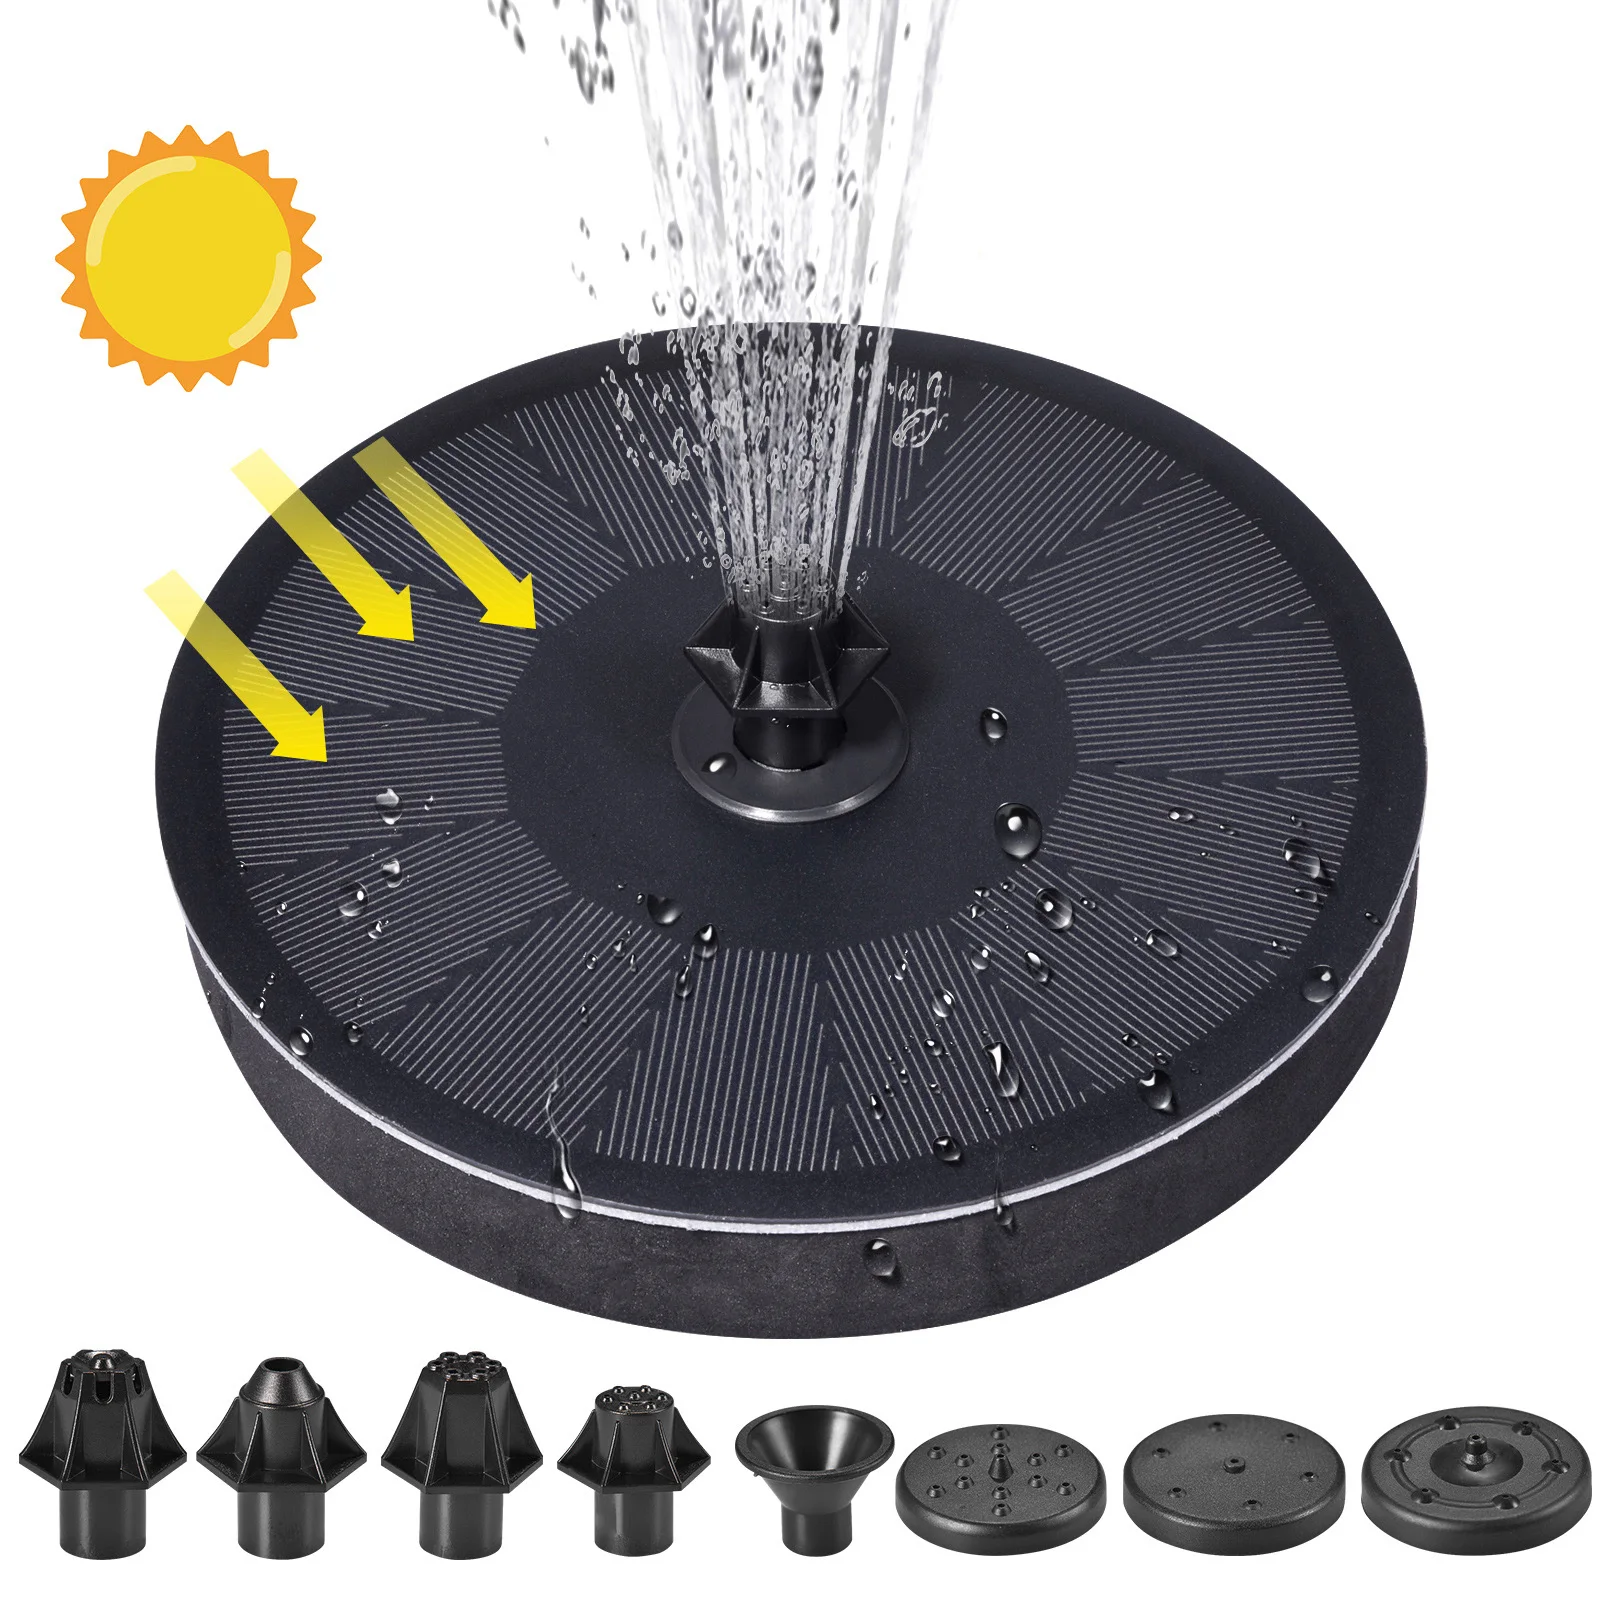 

7V/2.2W Solar Water Fountain Pump Circle Floating Garden Solar Powered Fountain Pump Swimming Pools Pond Lawn Garden Outdoor